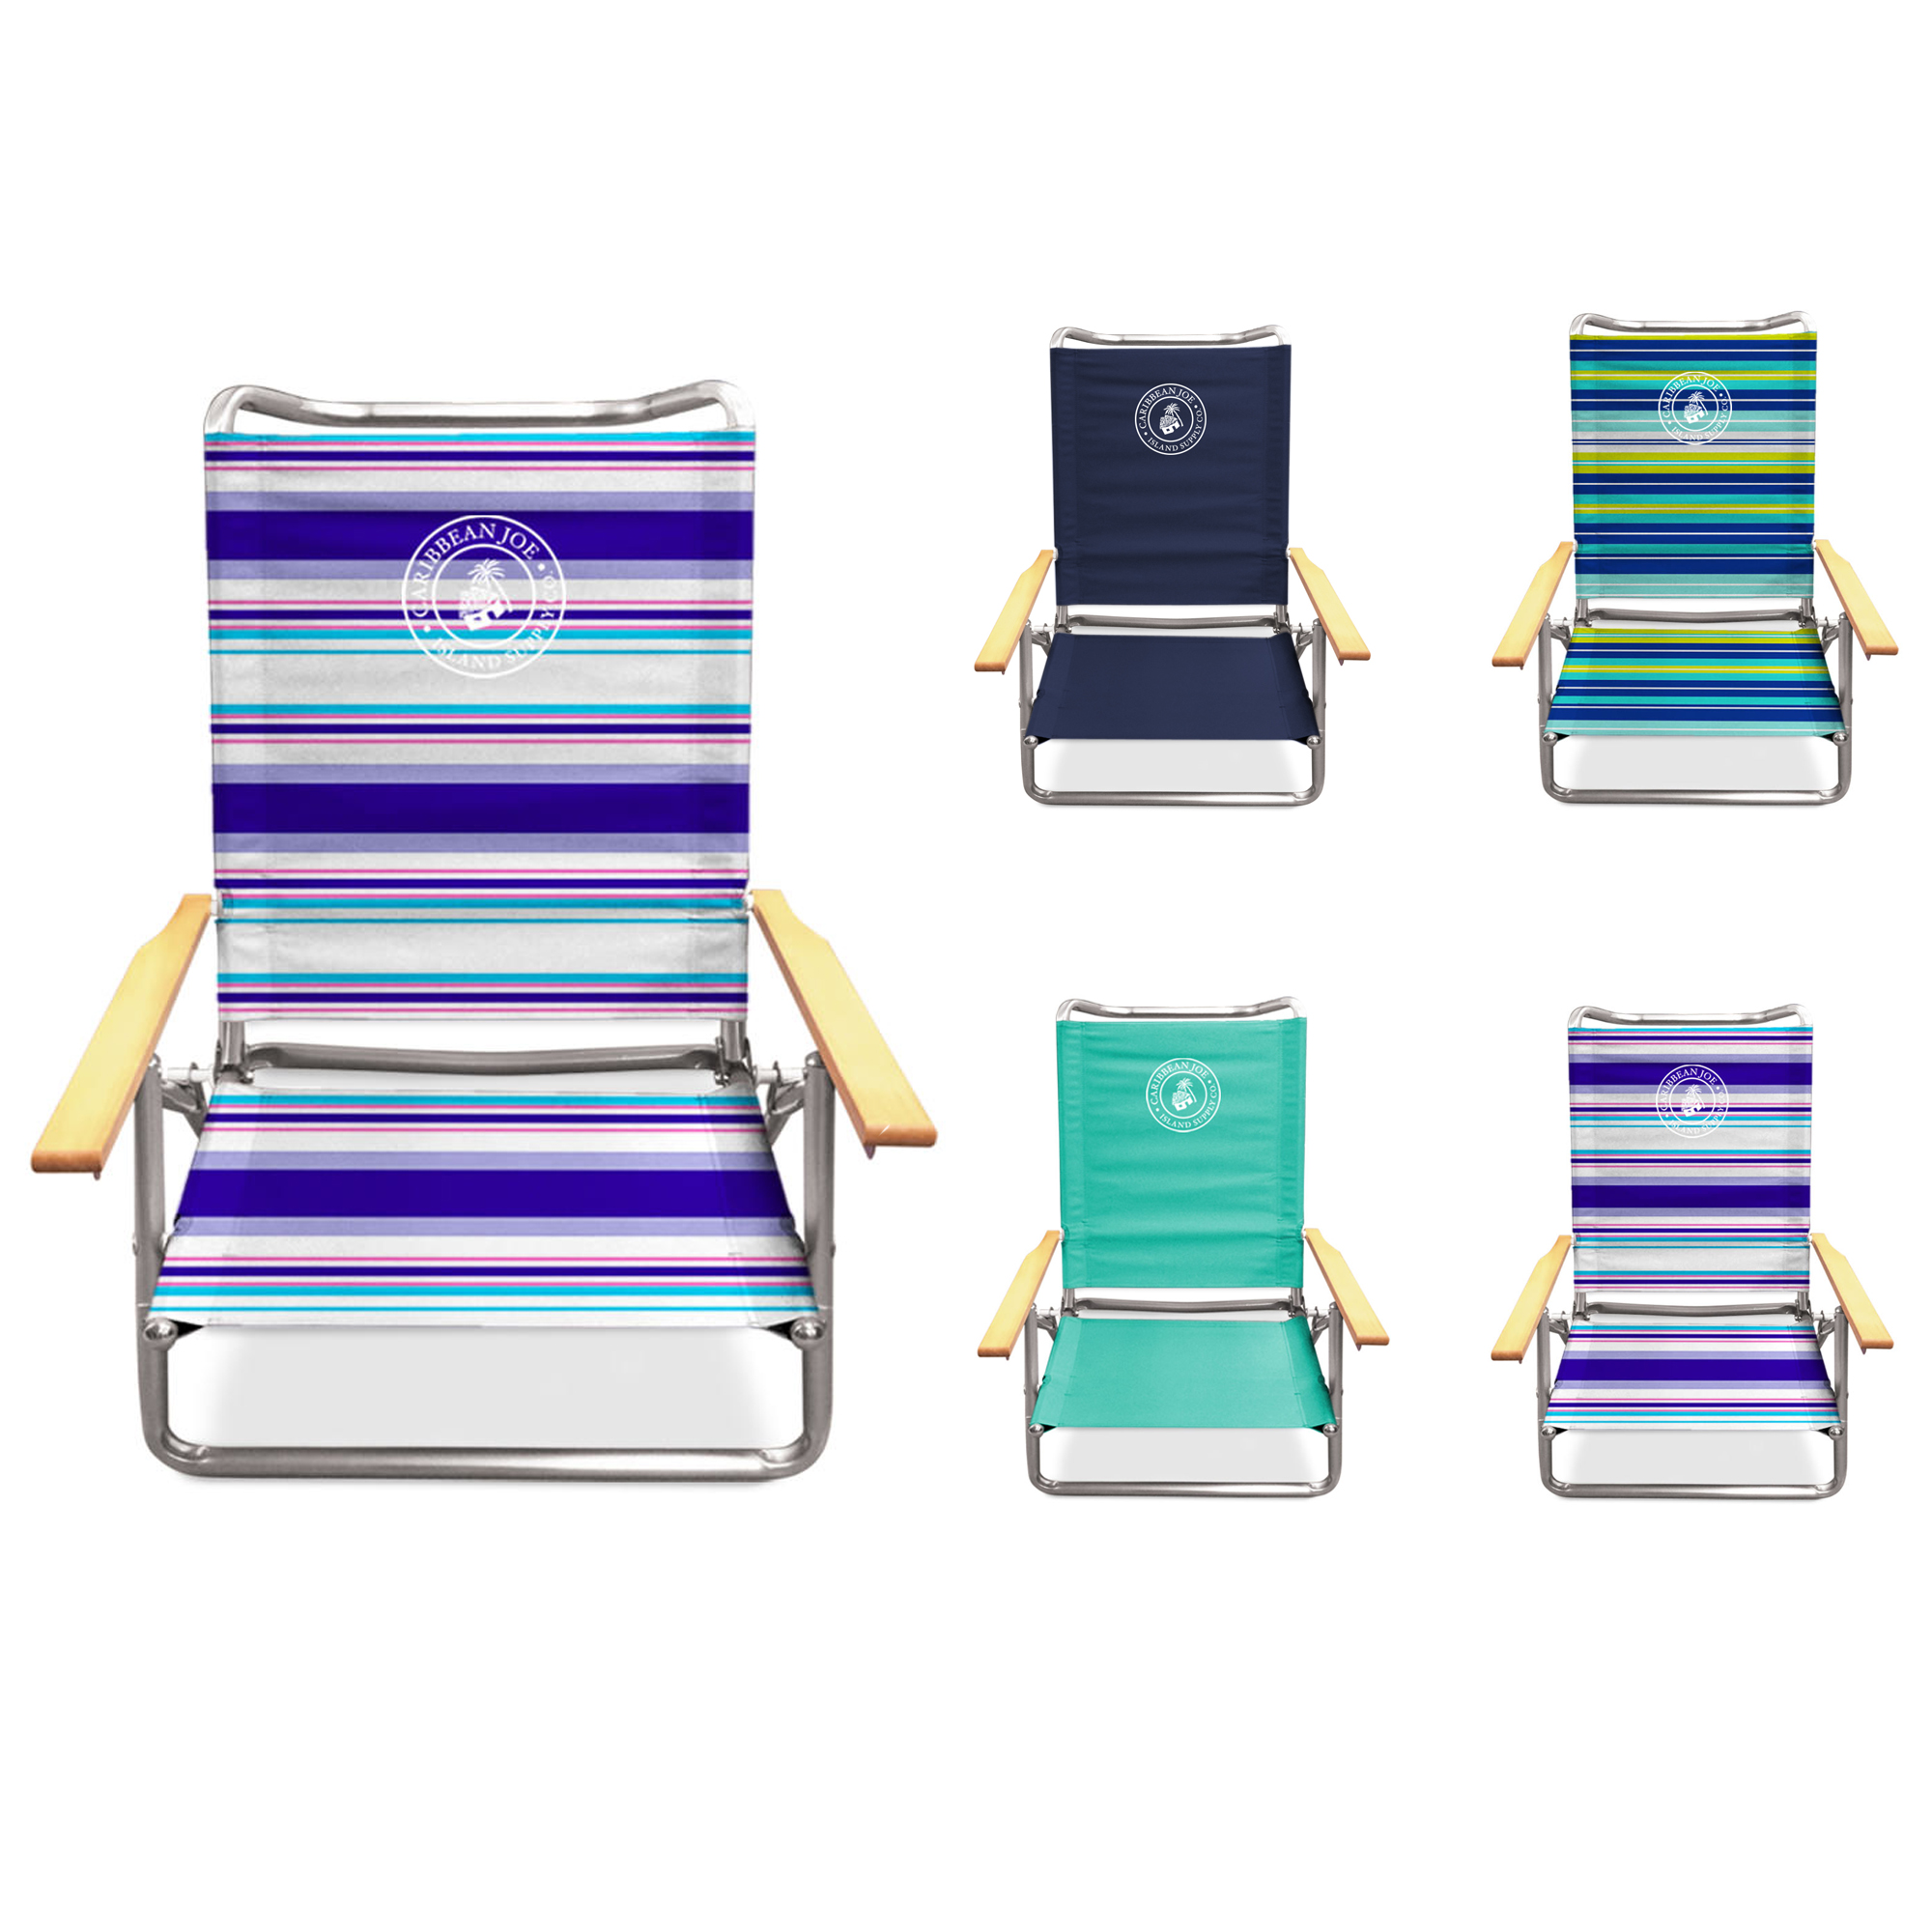 26+ Colors For Outdoor Furniture